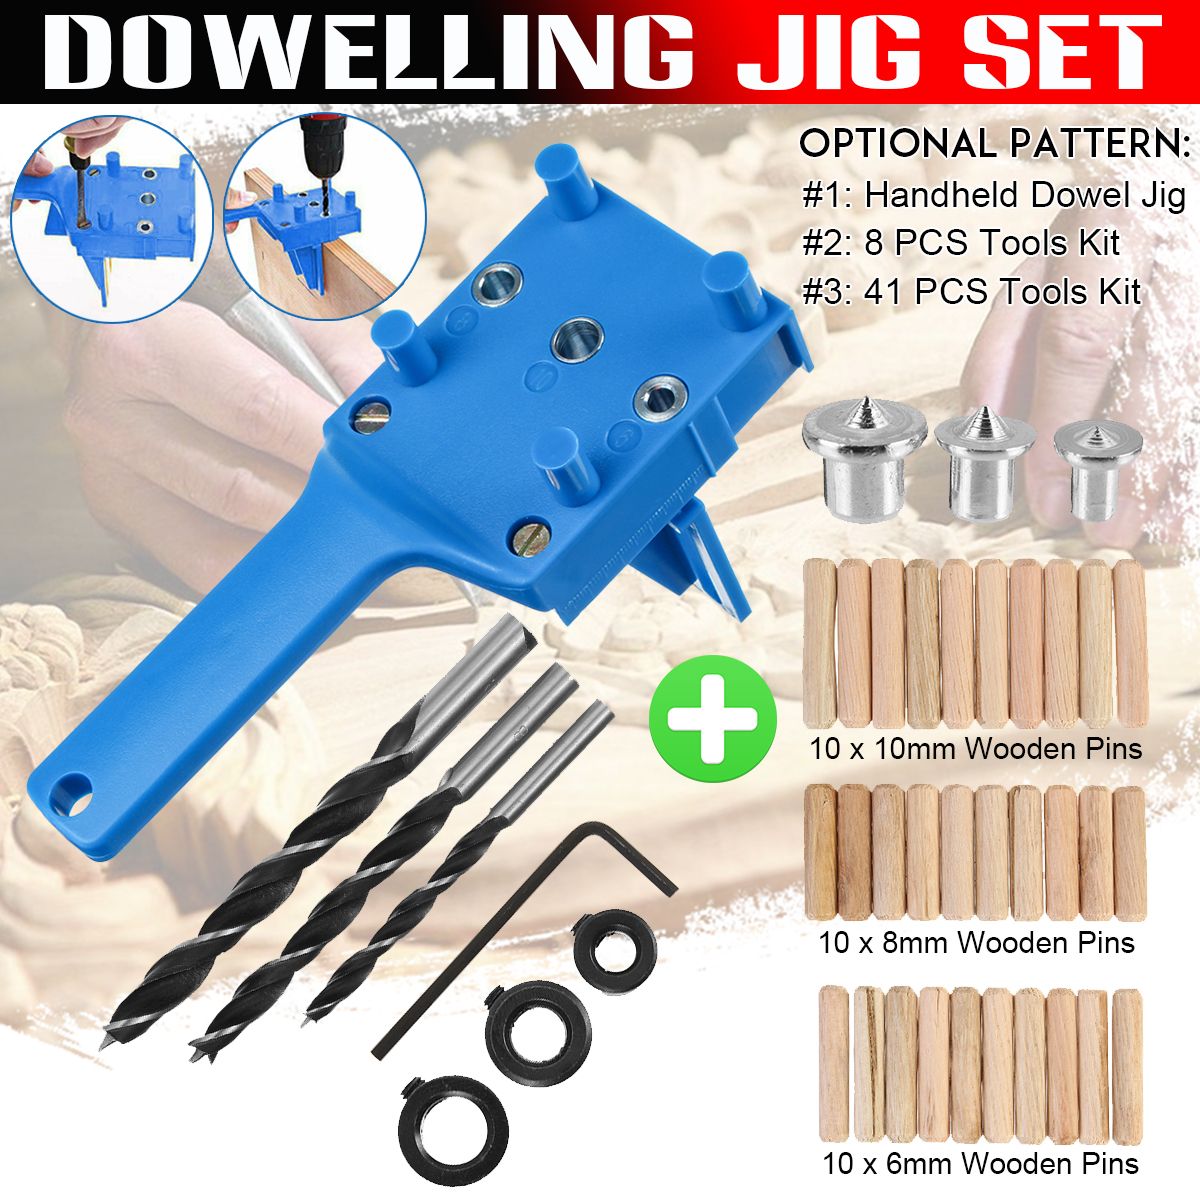 6810mm-Woodworking-Dowel-Jig-Drill-Guide-Metal-Sleeve-Handheld-Wood-Doweling-Hole-Drill-Guide-1711712